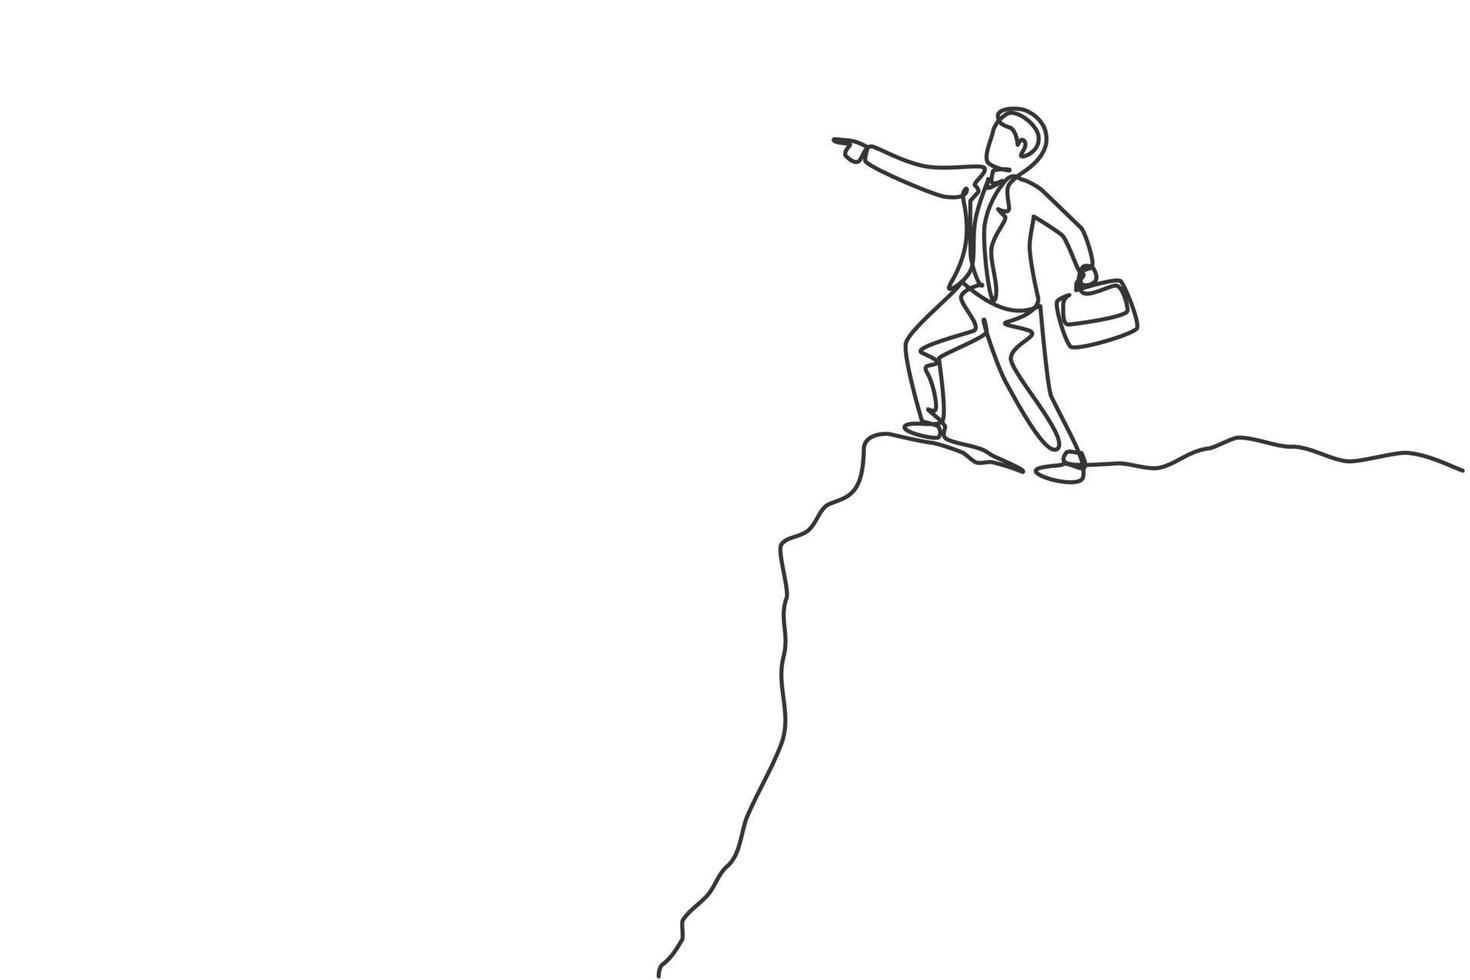 Single one line drawing young smart business man standing at cliff edge pointing finger to the sky. Business metaphor concept. Modern continuous line draw. Minimal design graphic vector illustration